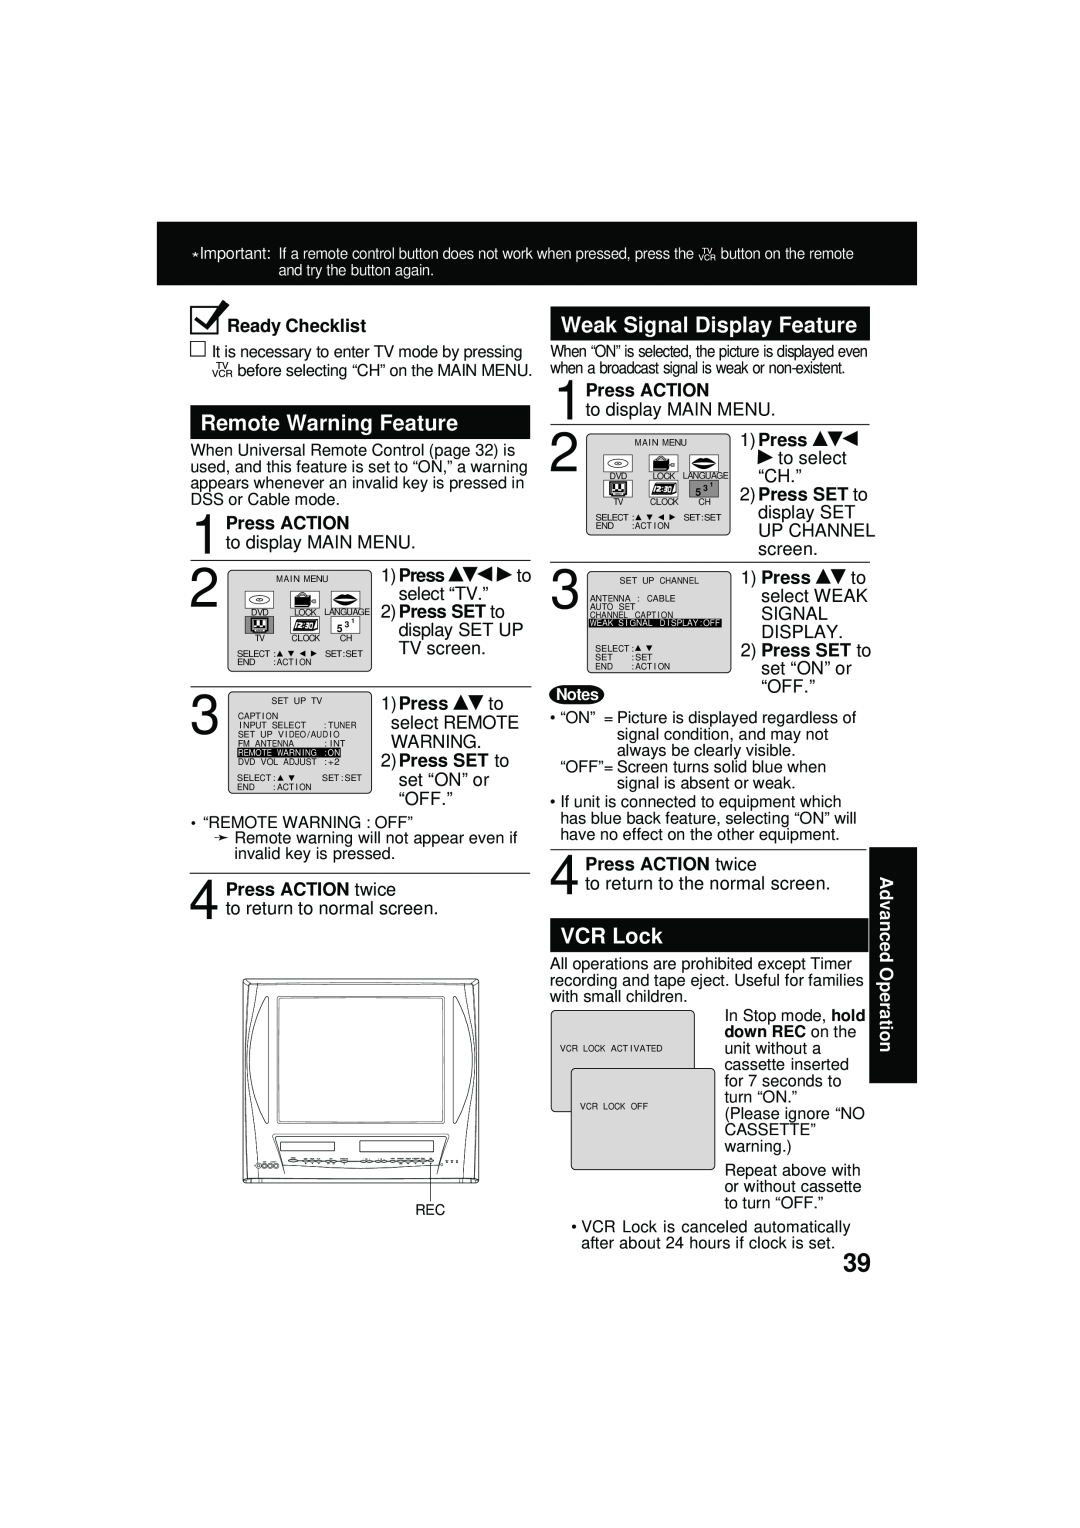 Panasonic PV DM2092 manual Remote Warning Feature, Weak Signal Display Feature, VCR Lock, 1Press ACTION, Press ACTION twice 